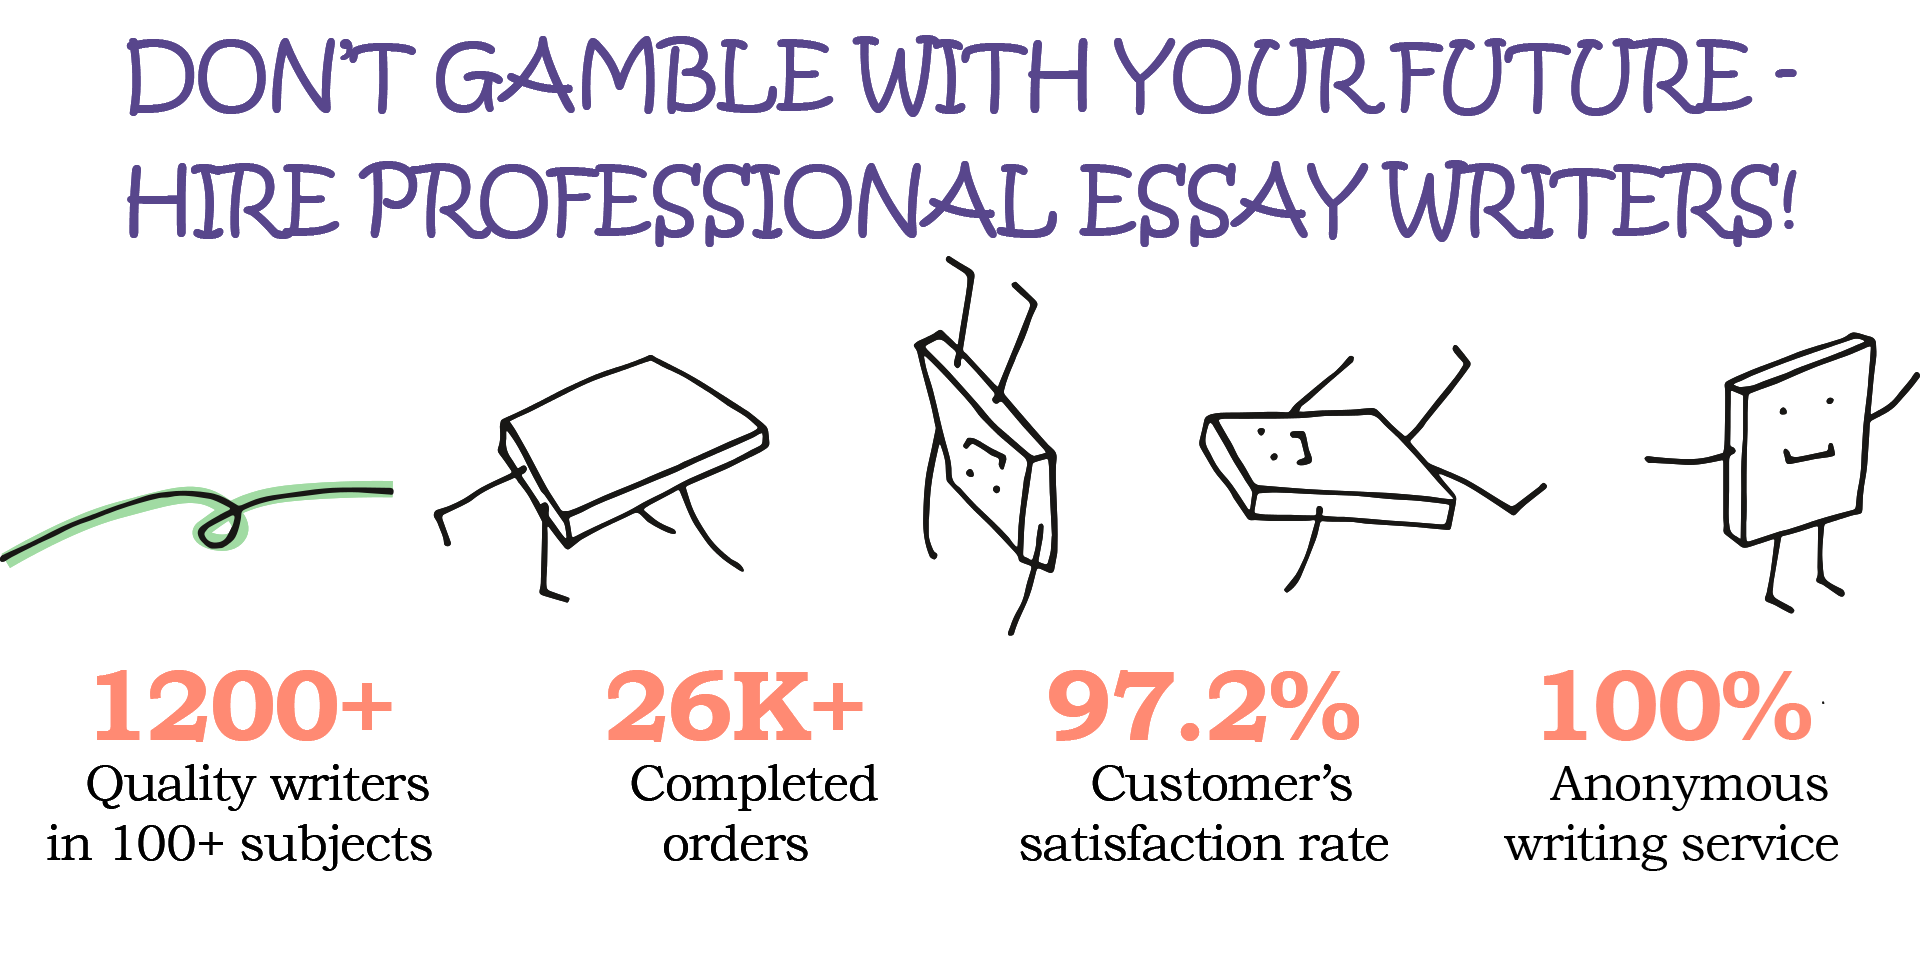 essay writing services An Incredibly Easy Method That Works For All